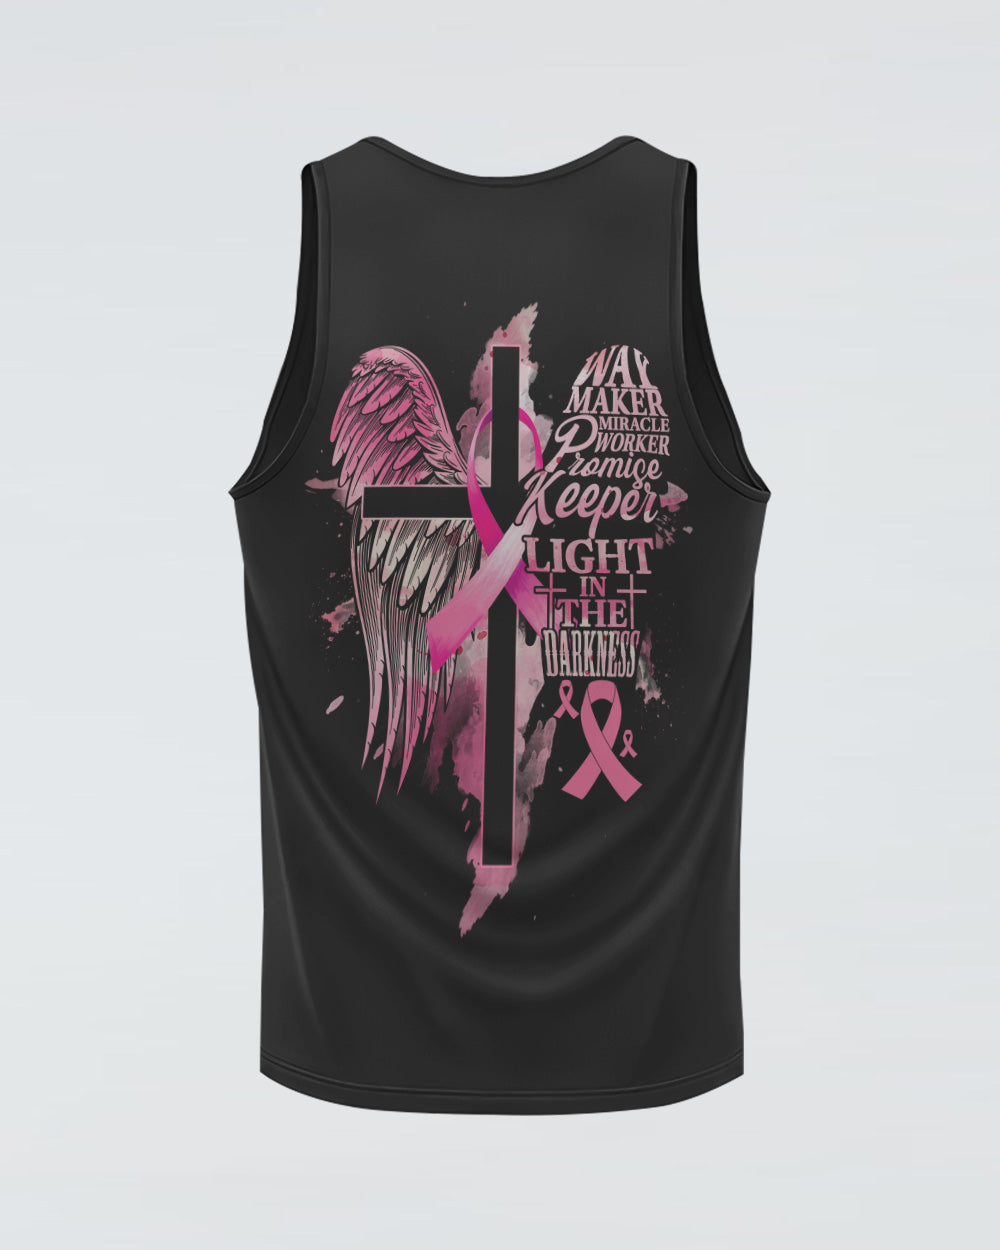 Way Maker Miracle Worker Promise Keeper Life Half Wings Women's Christian Tanks